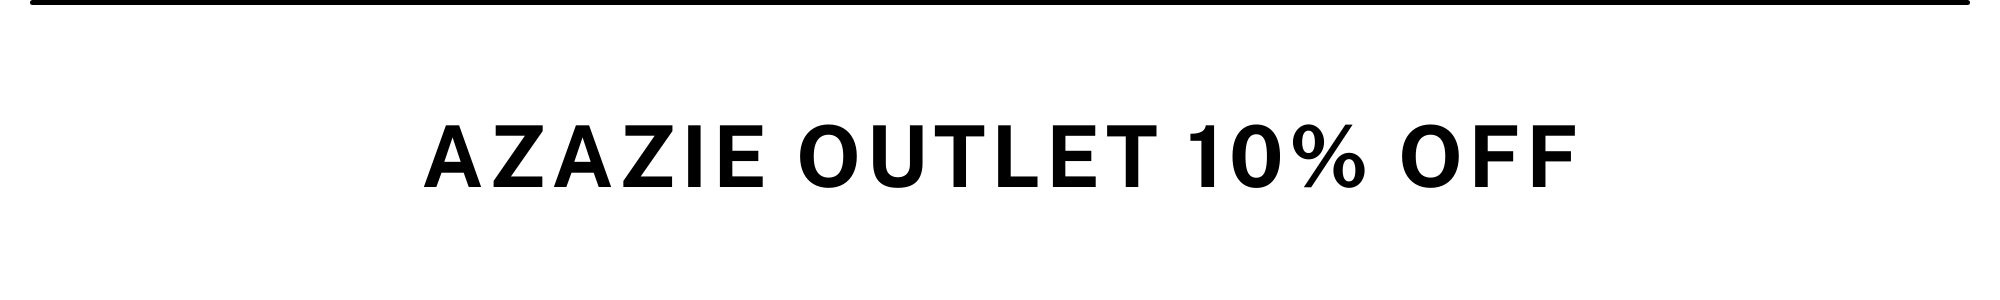 outlet 10% off